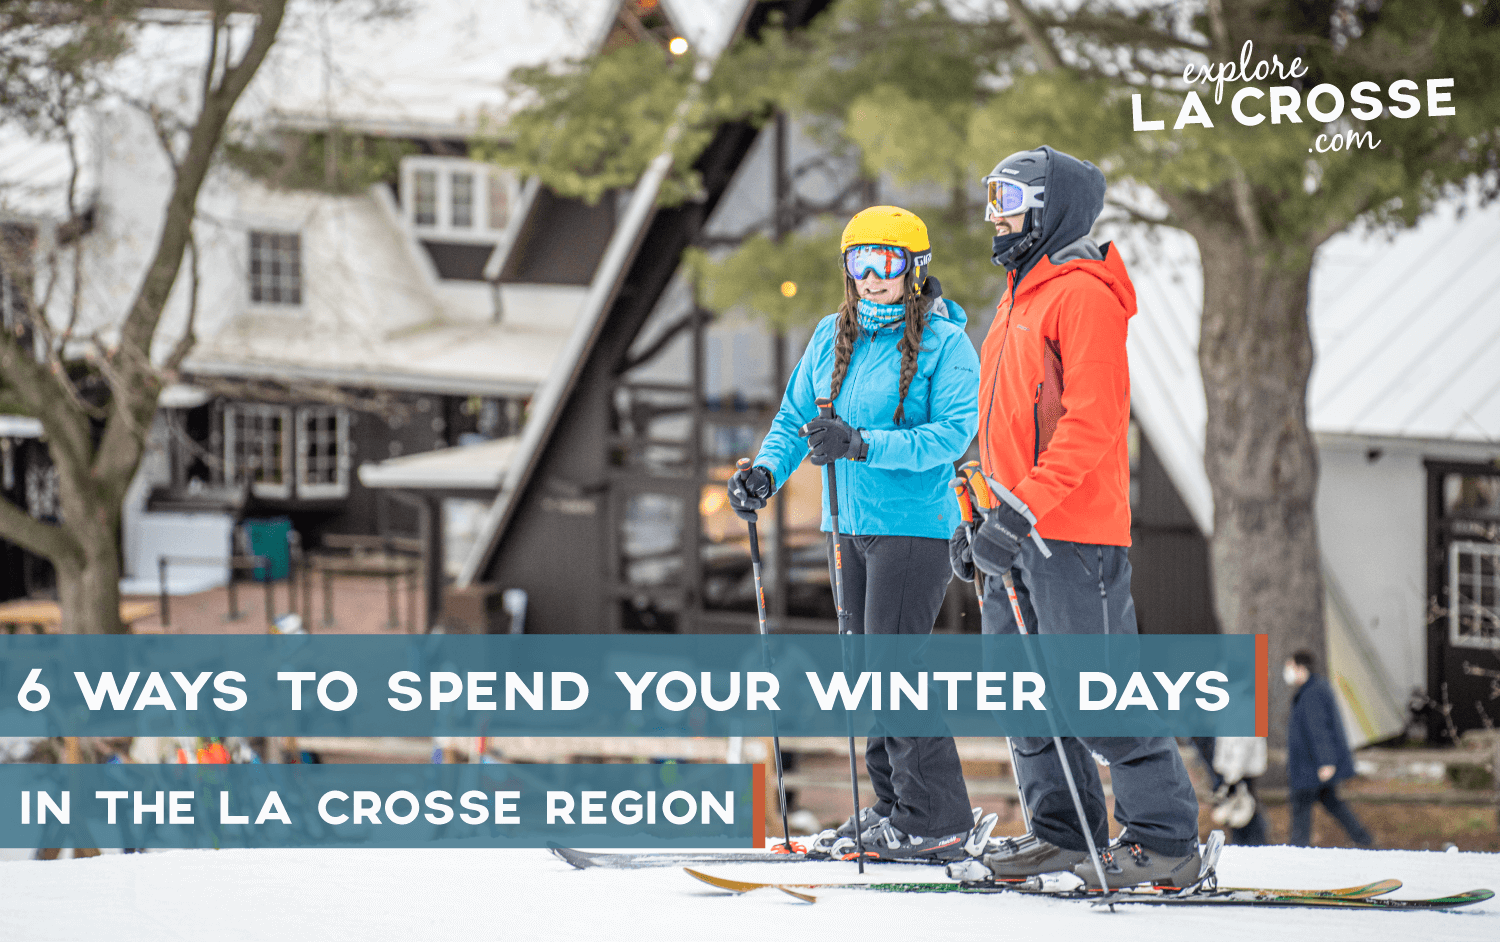 A couple skiing at Mt. La Crosse with a title that says 9 Ways to spend Winter Days in the La Crosse Region